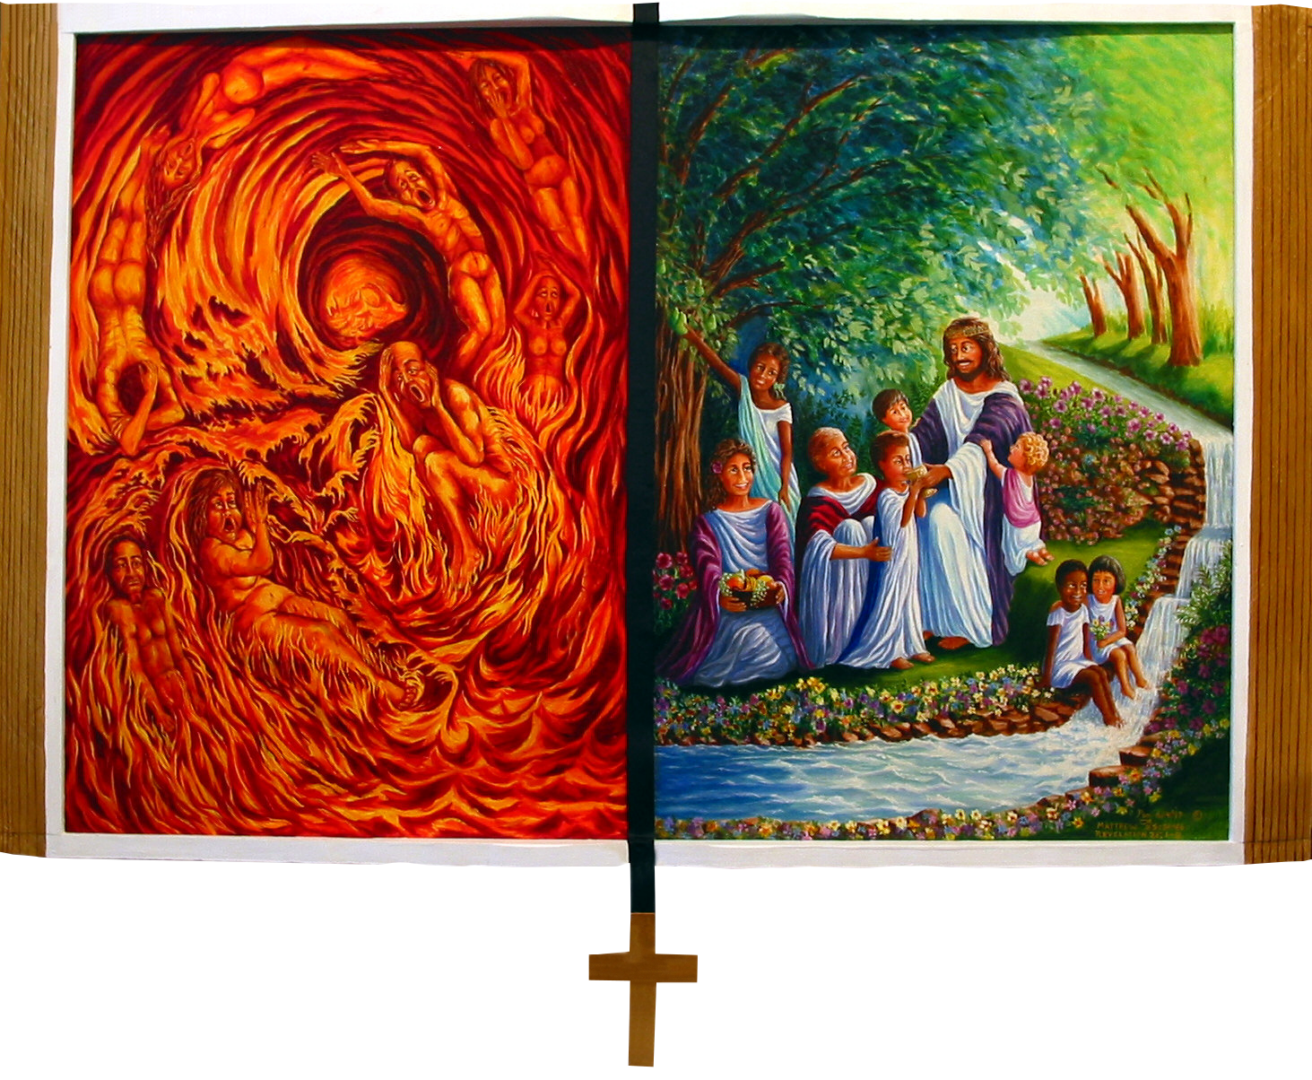 43 - Lake of Fire, River of Life - Rev 20, 21,